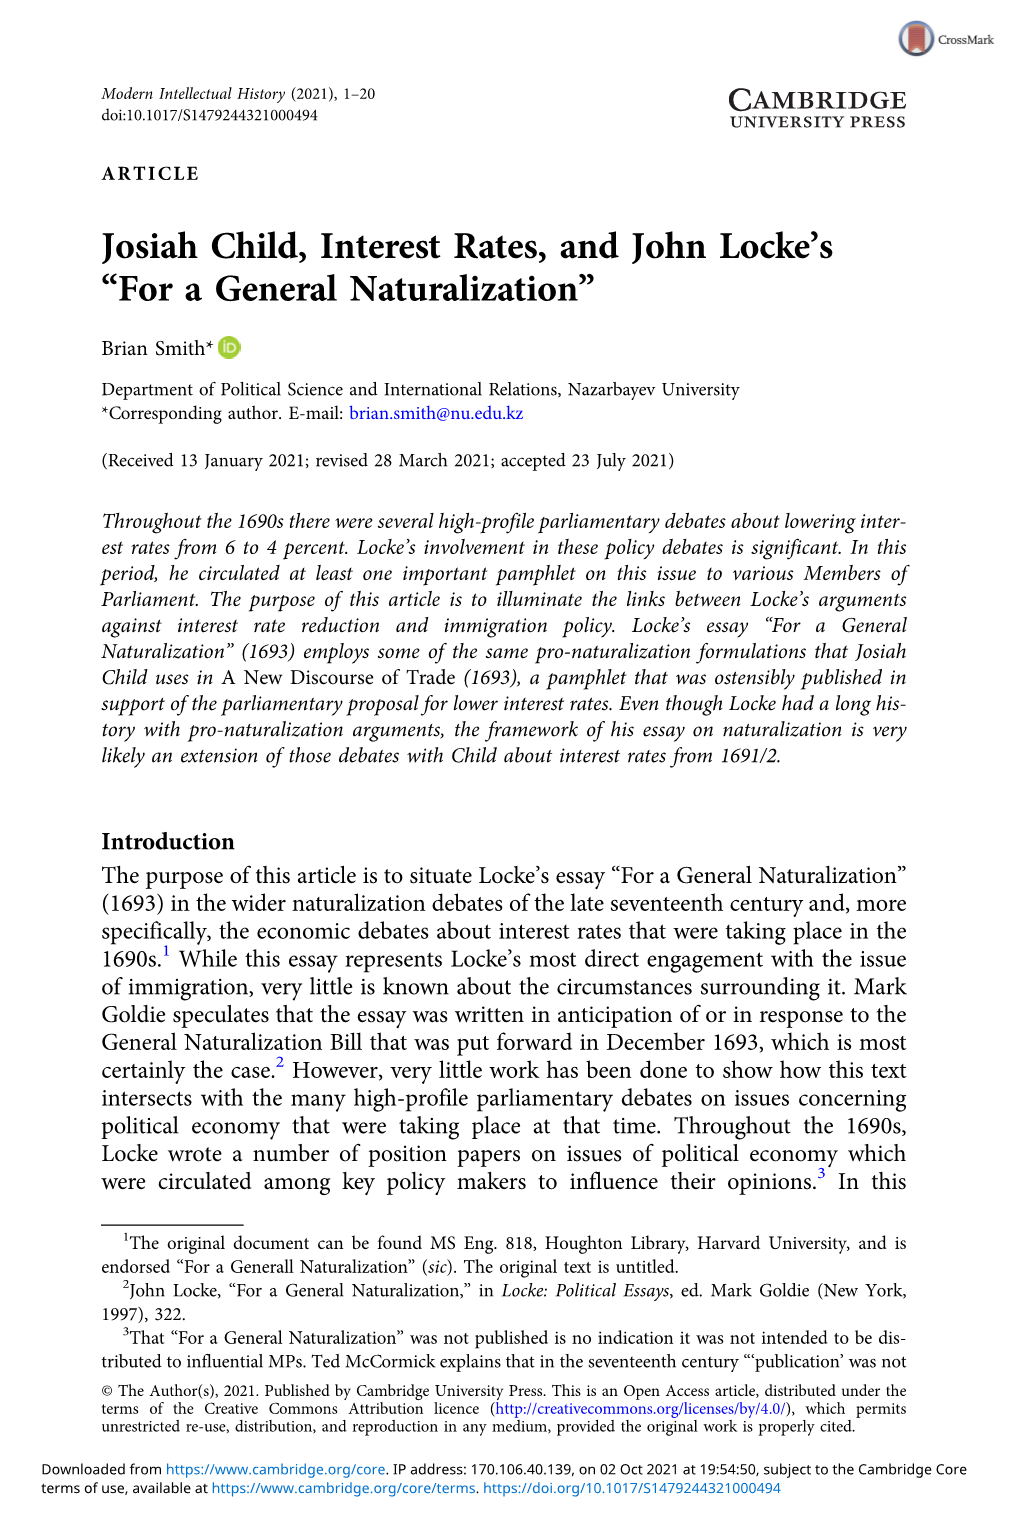 Josiah Child, Interest Rates, and John Locke's “For a General Naturalization”